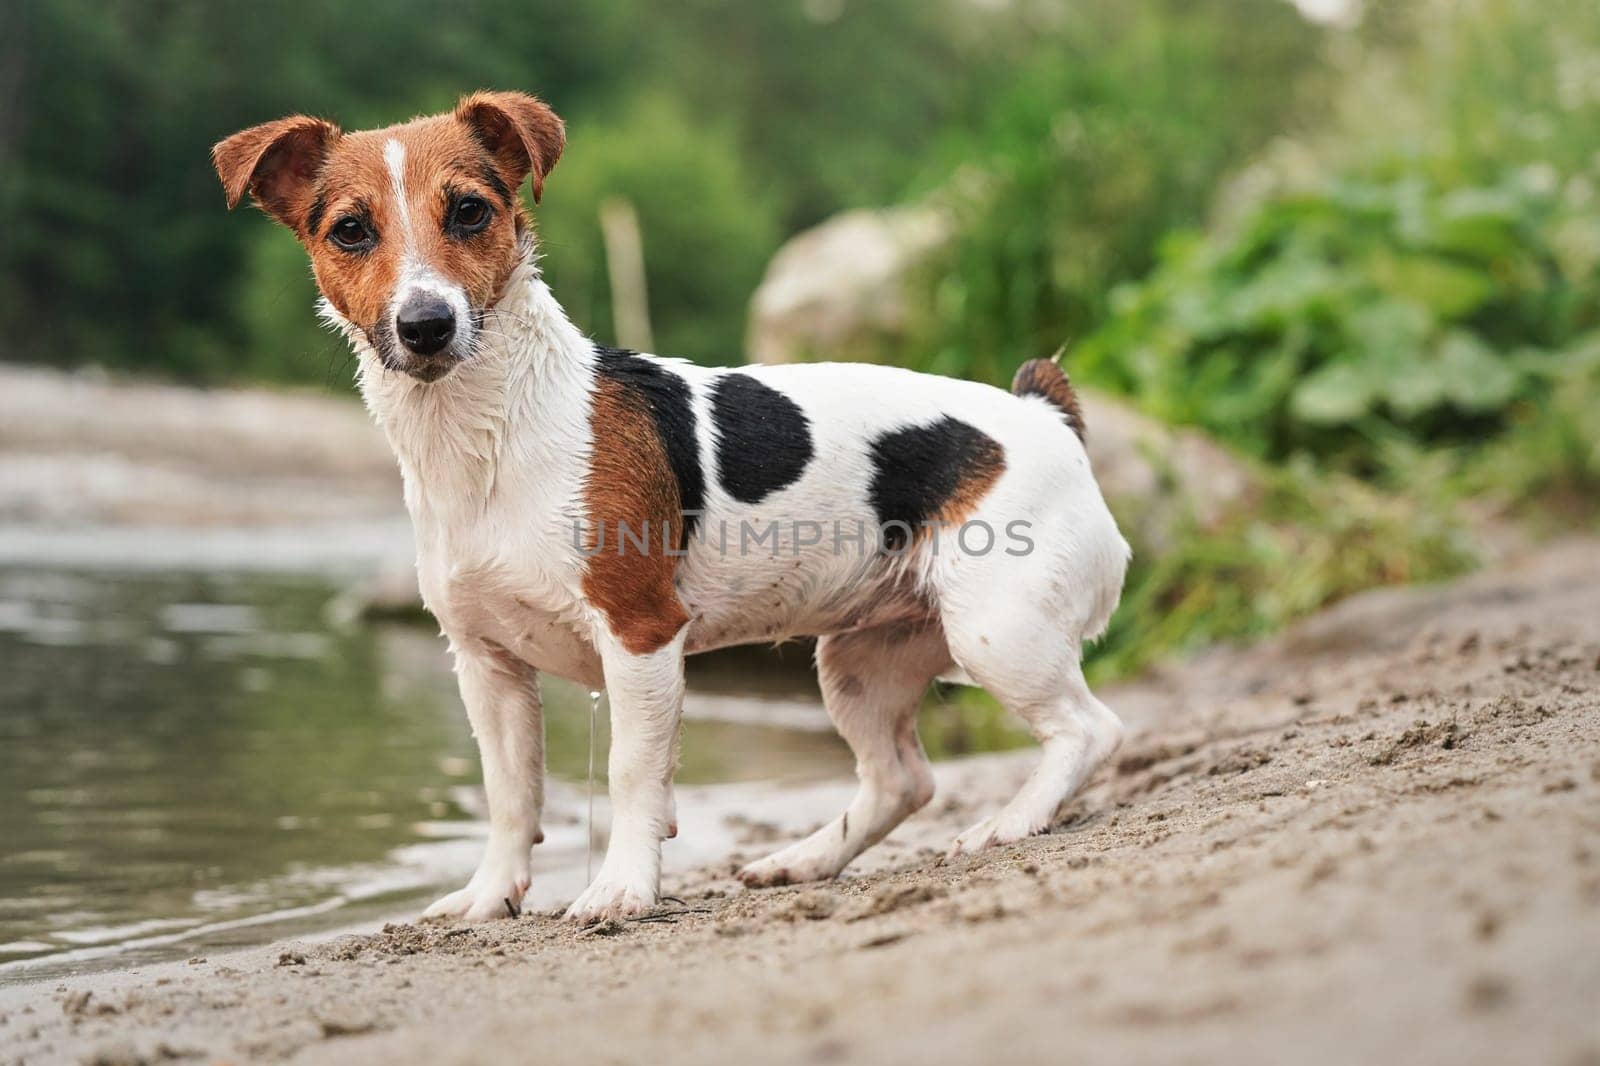 Small Jack Russell terrier standing on sandy shore near river, looking into camera attentively by Ivanko